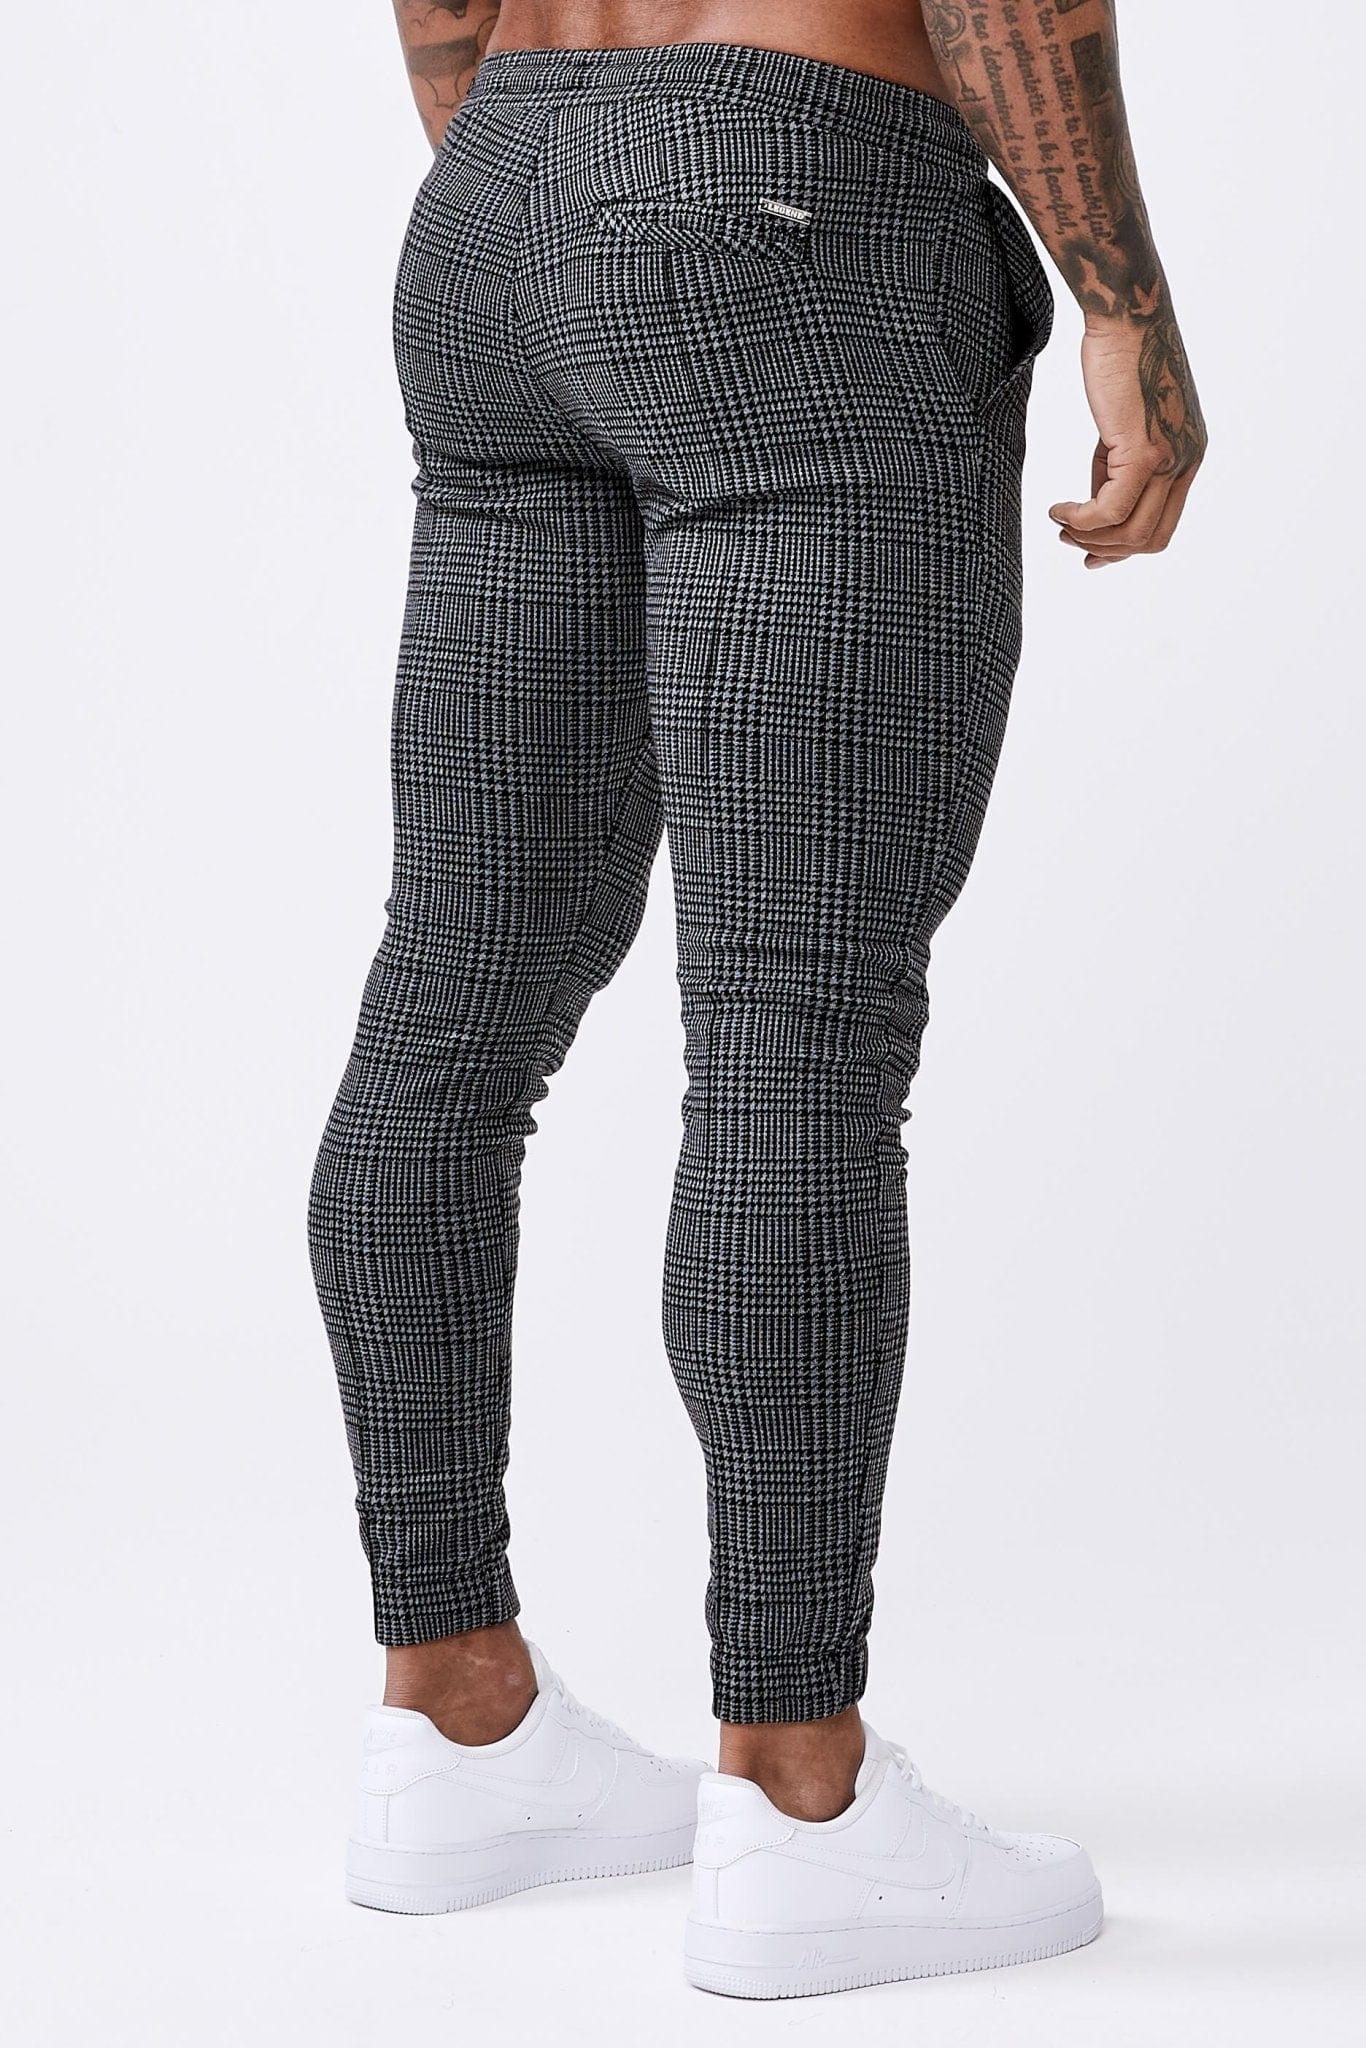 Legend London Trousers HOUNDSTOOTH CHECK - CHARCOAL GREY